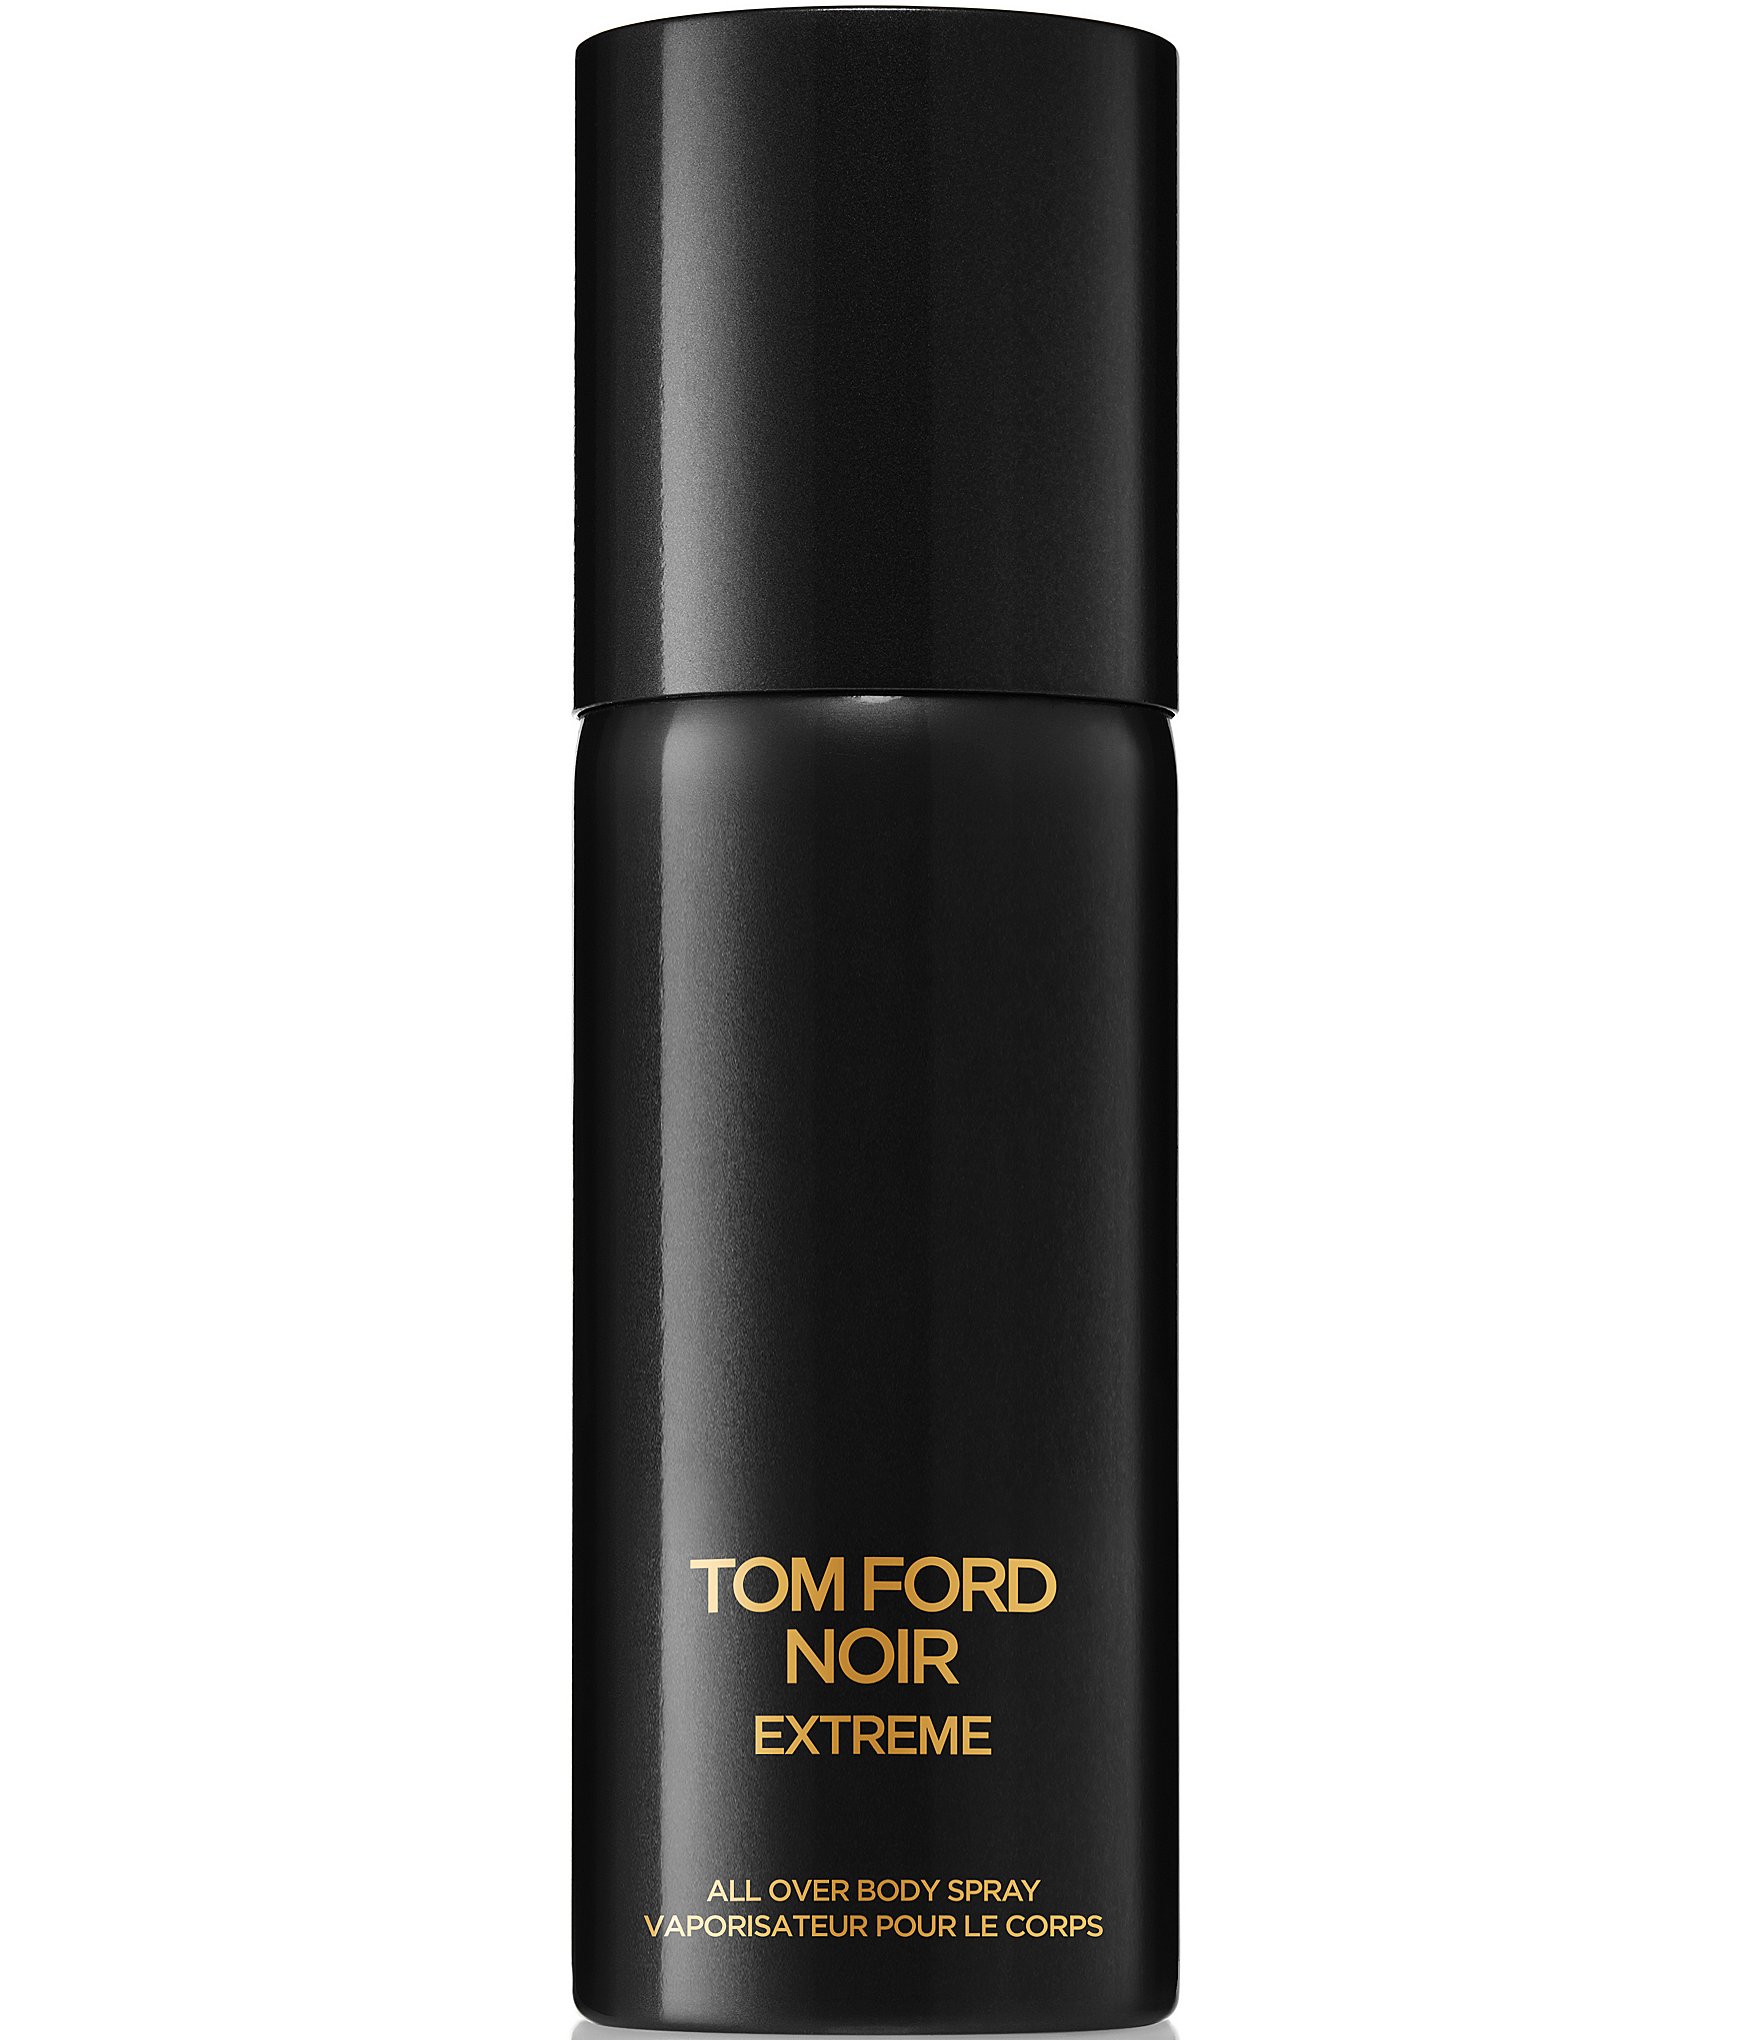 Top 62+ imagen noir extreme by tom ford - Abzlocal.mx